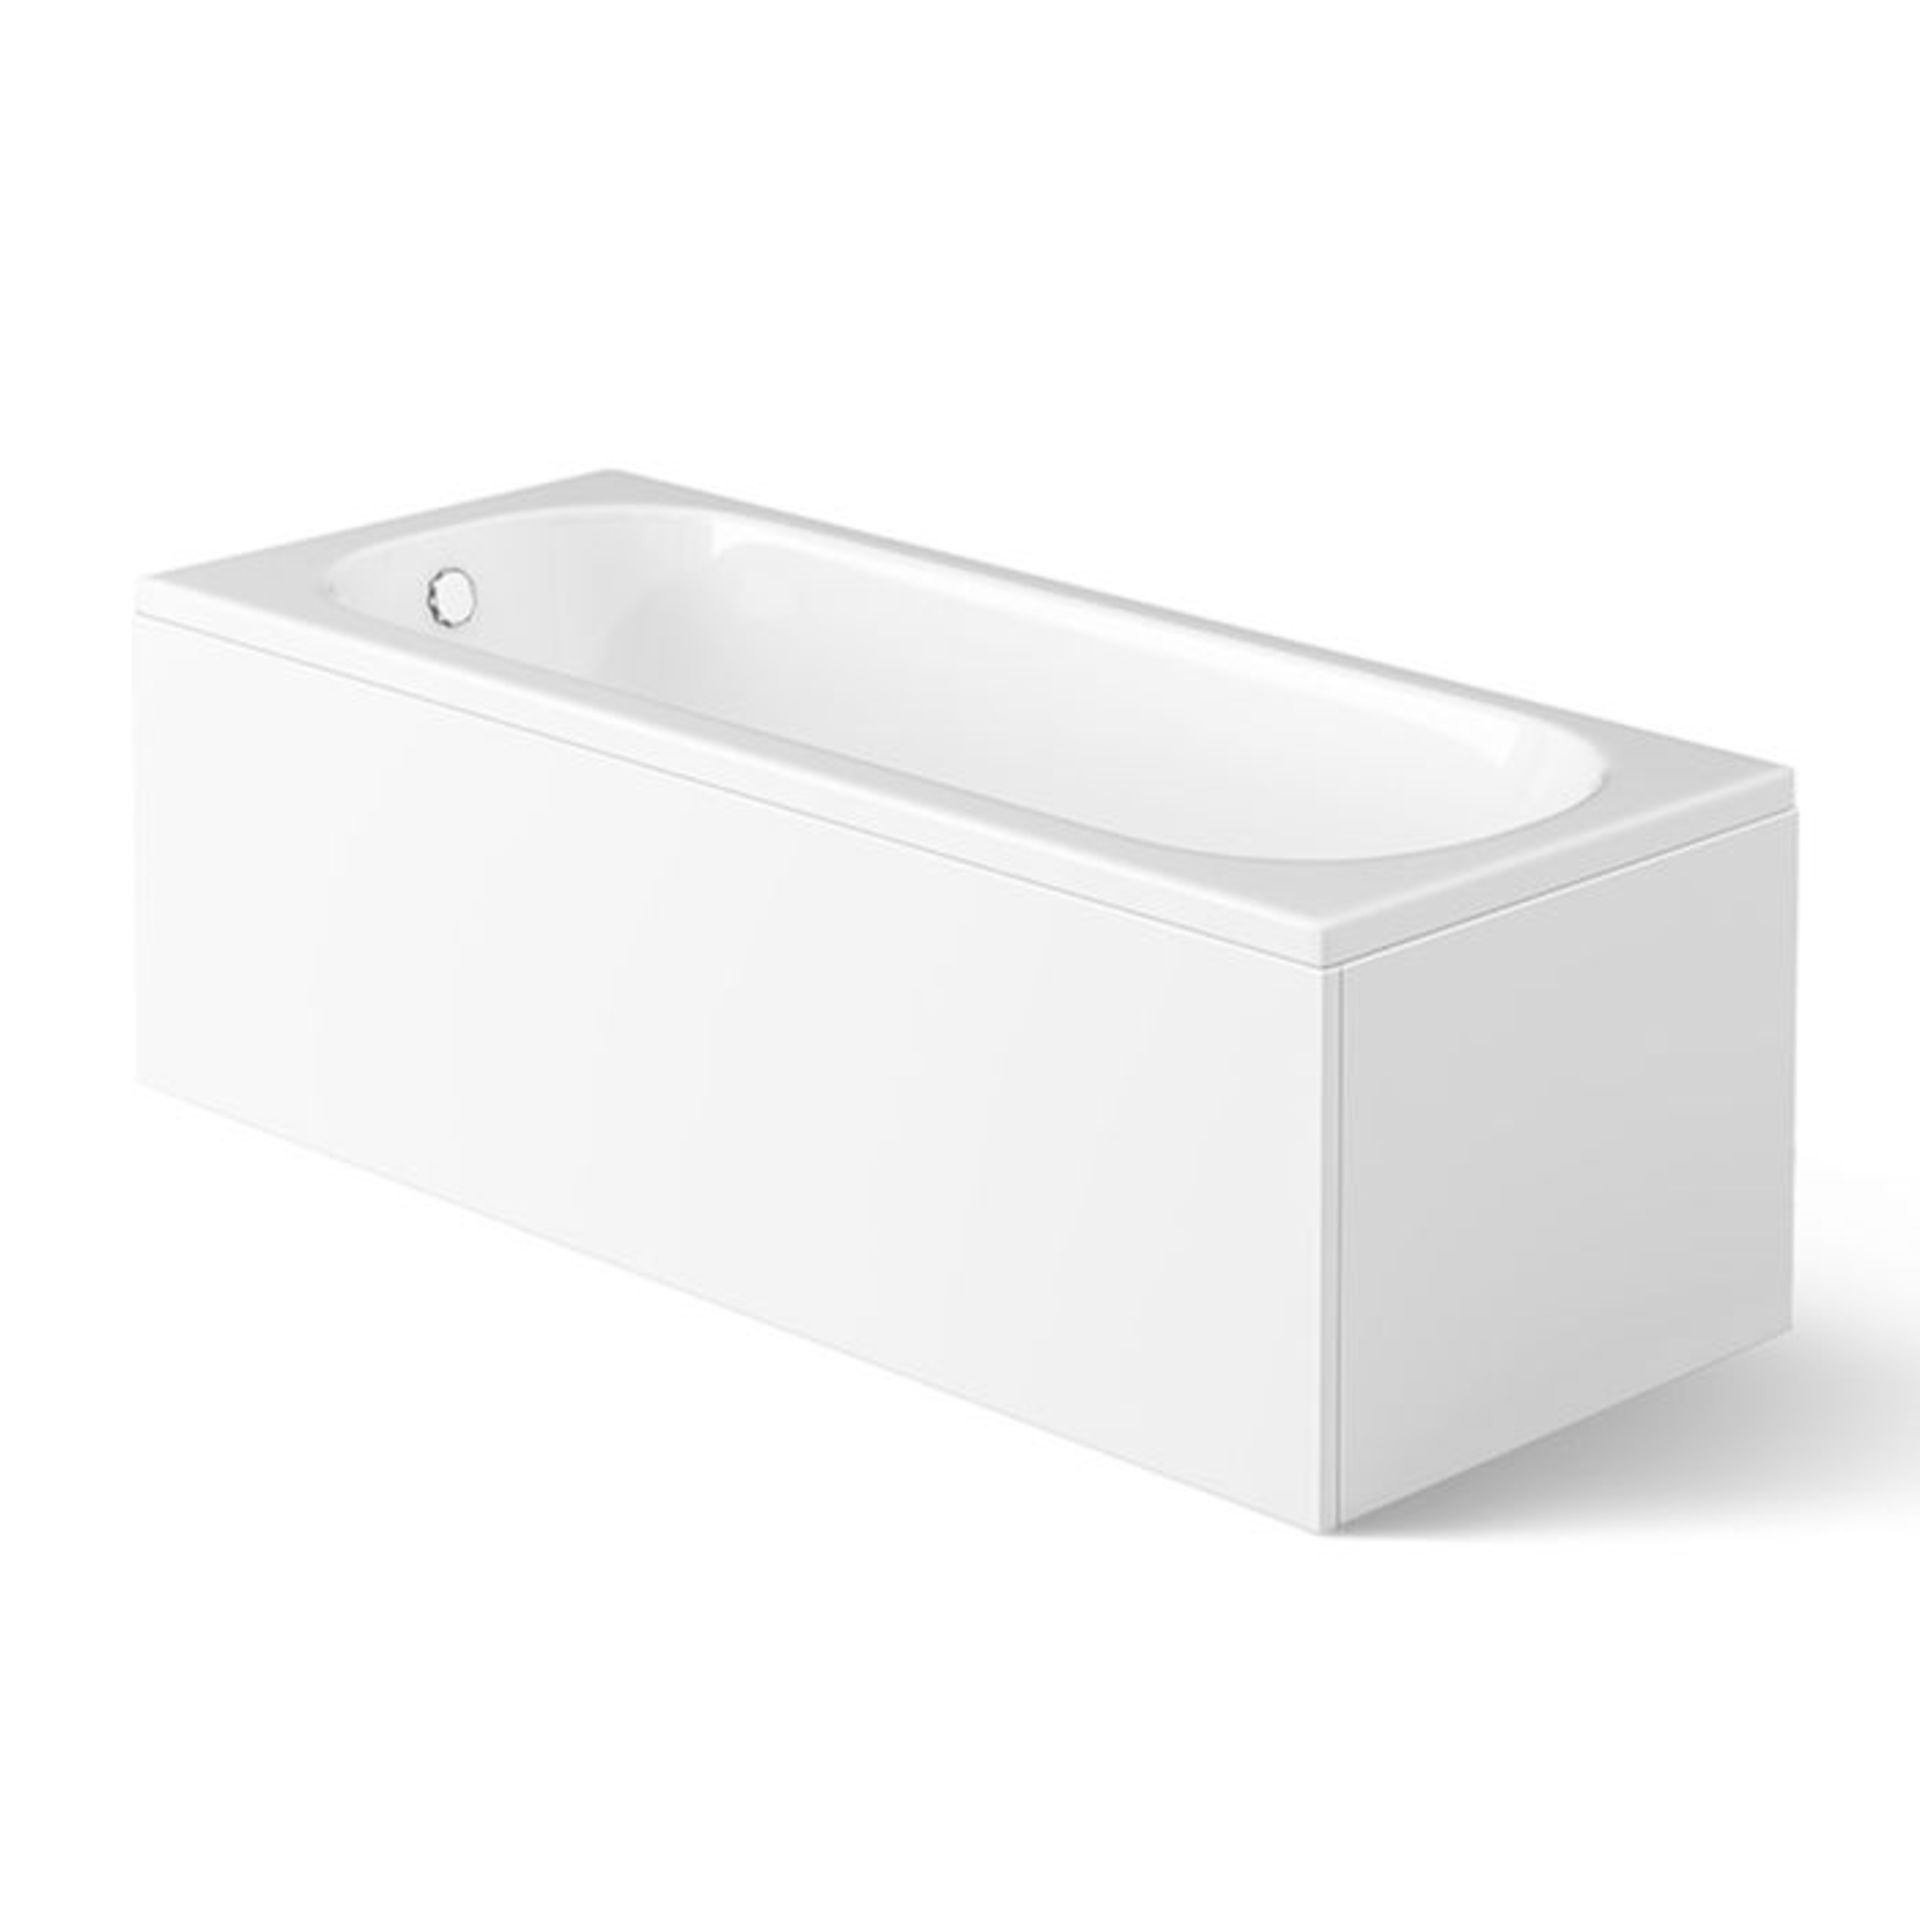 (SA35) 1700x700mm Straight Bath COMPLETE WITH SIDE Panel. It is great for the whole family, the kids